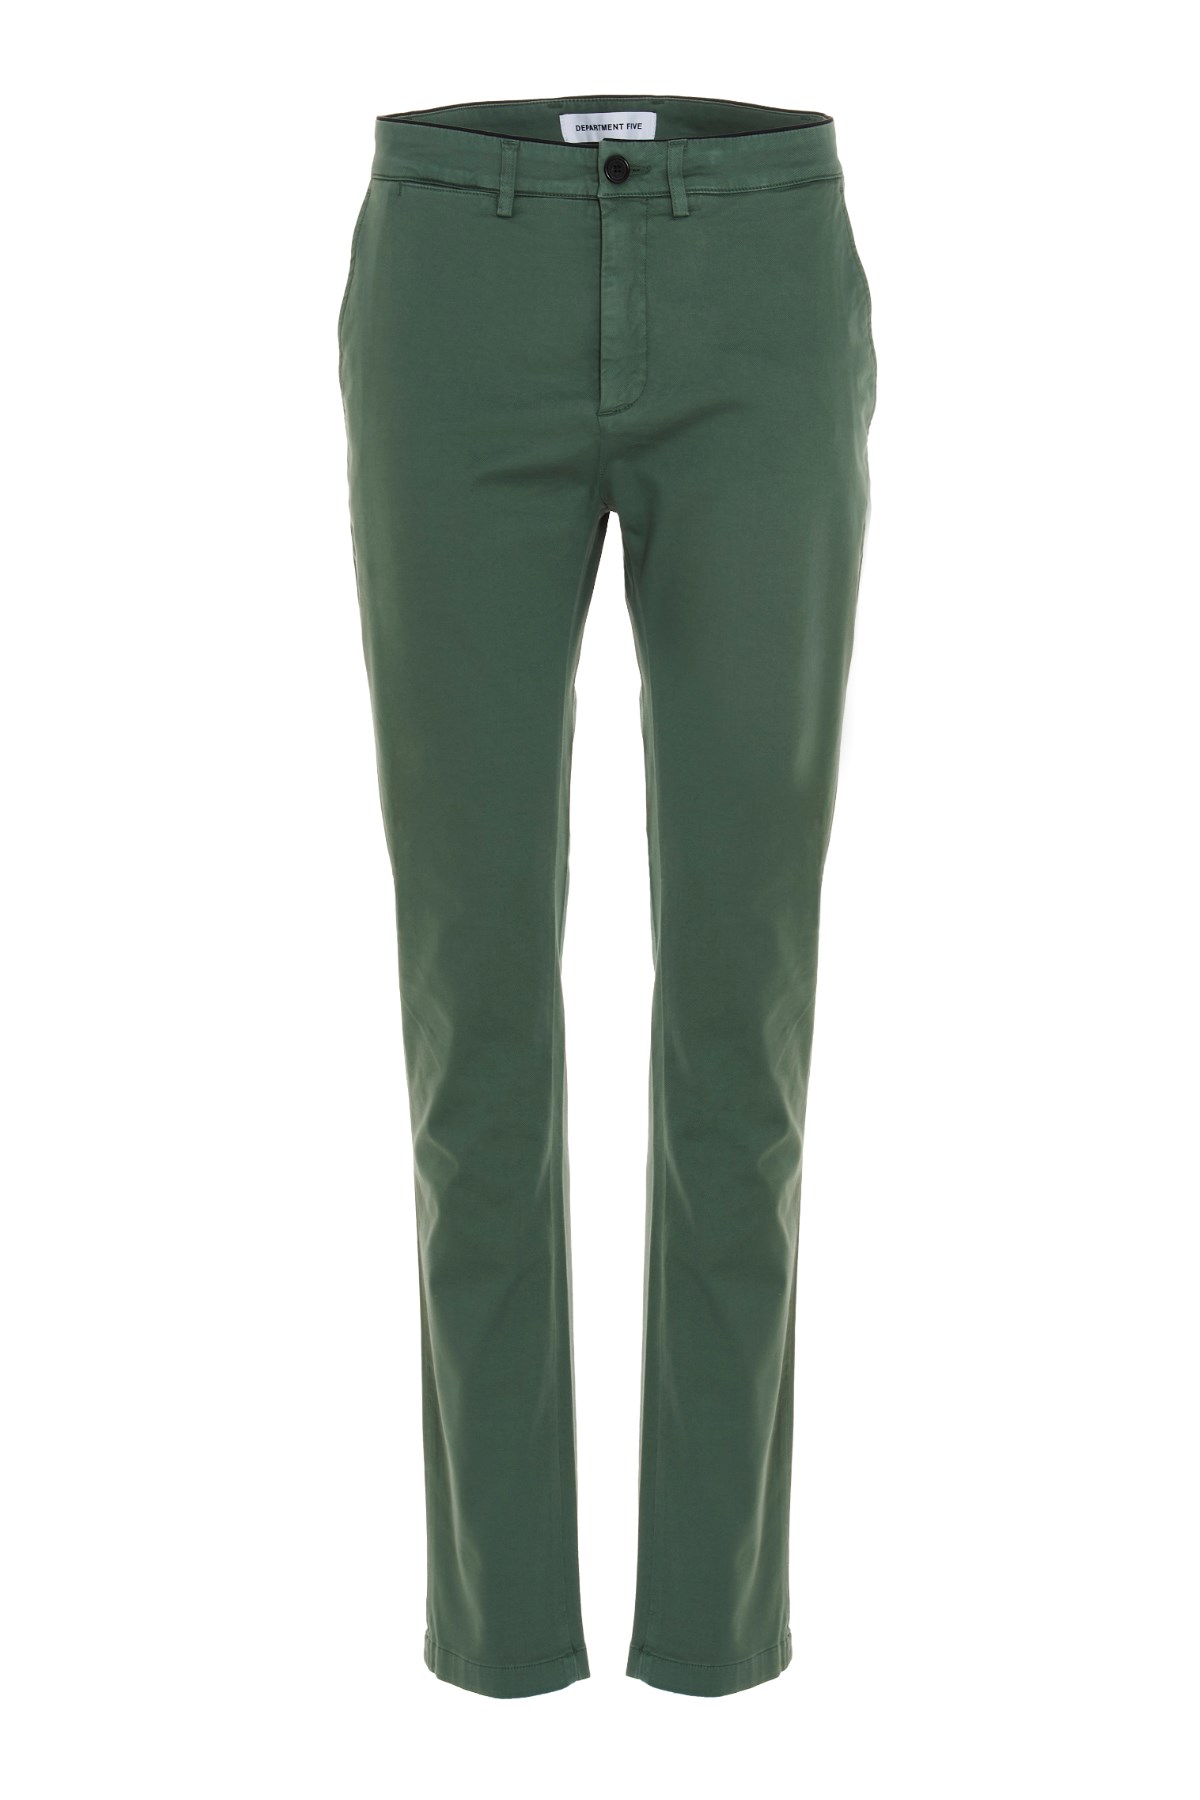 DEPARTMENT 5 ‘Mike' Chino Trousers